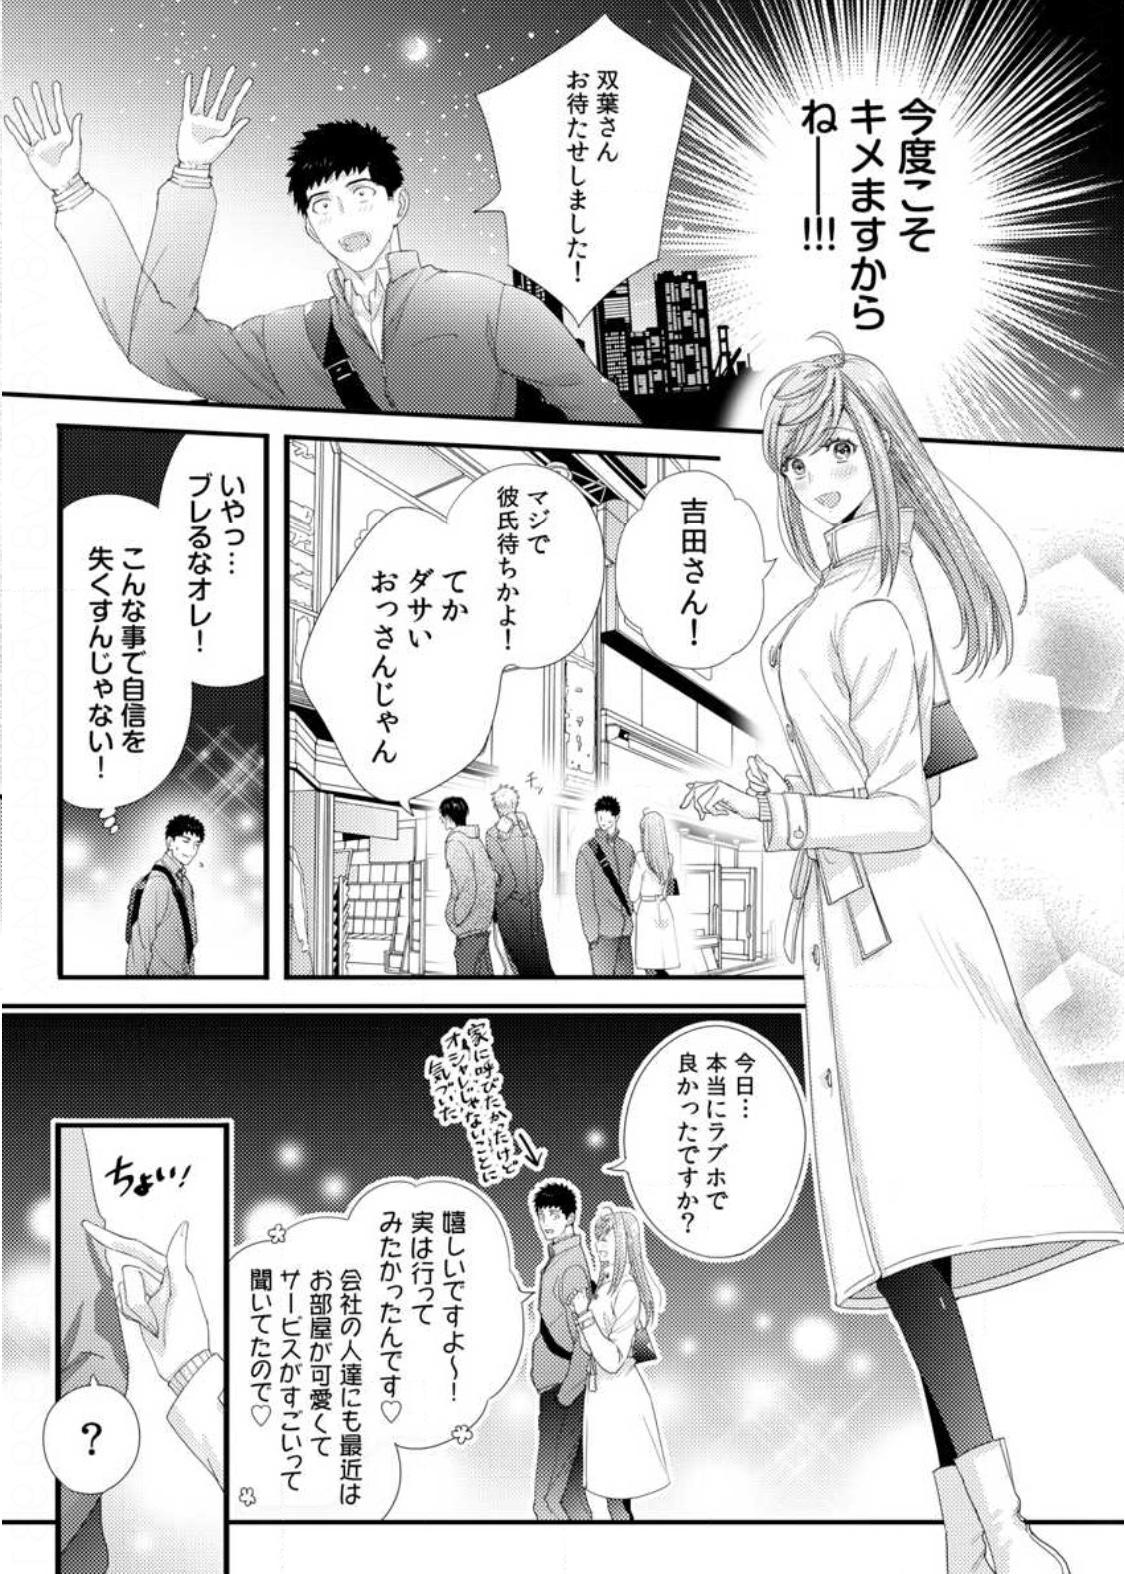 Please Let Me Hold You Futaba-San! Ch. 1-4 88